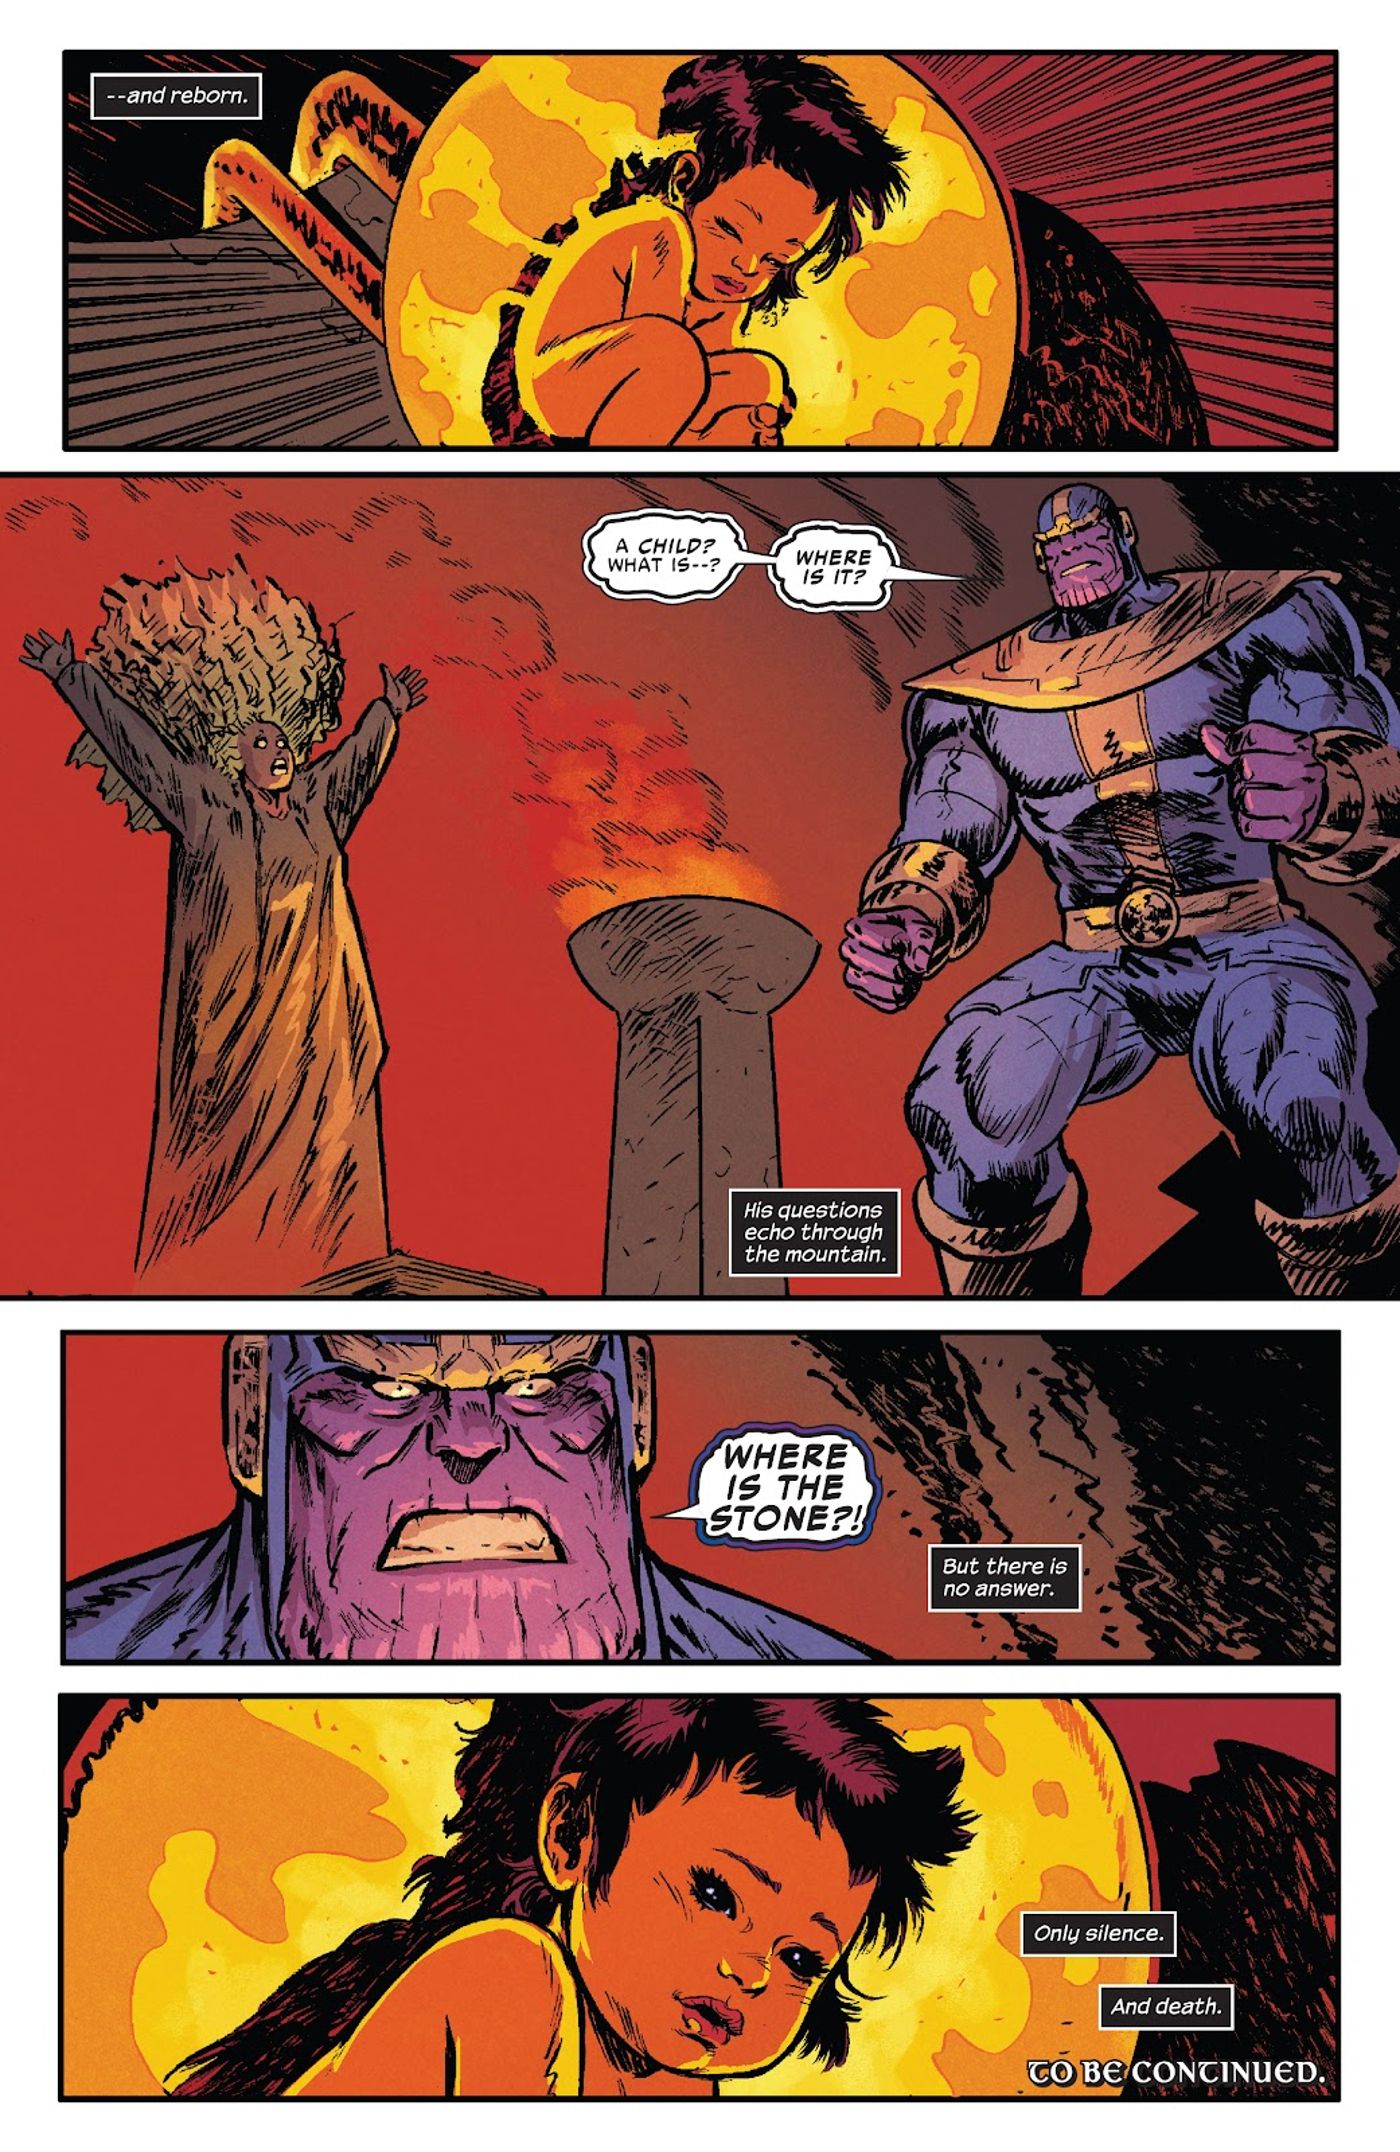 Thanos finds baby Hela instead of the Black Stone